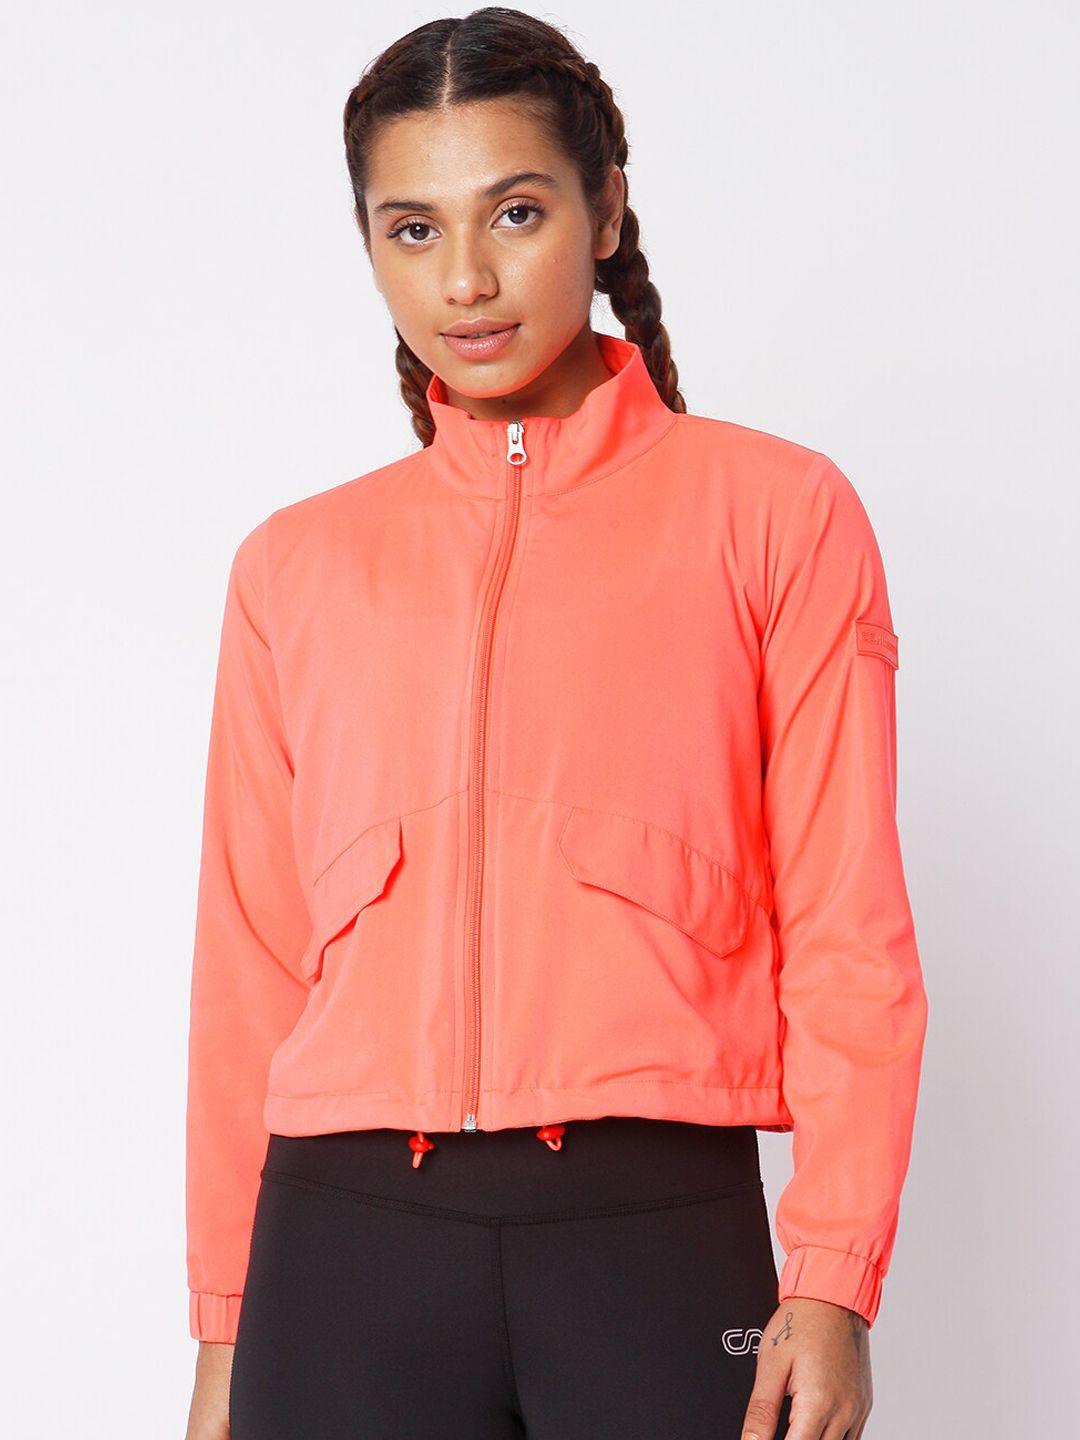 Silvertraq Women Coral Track Jacket Price in India